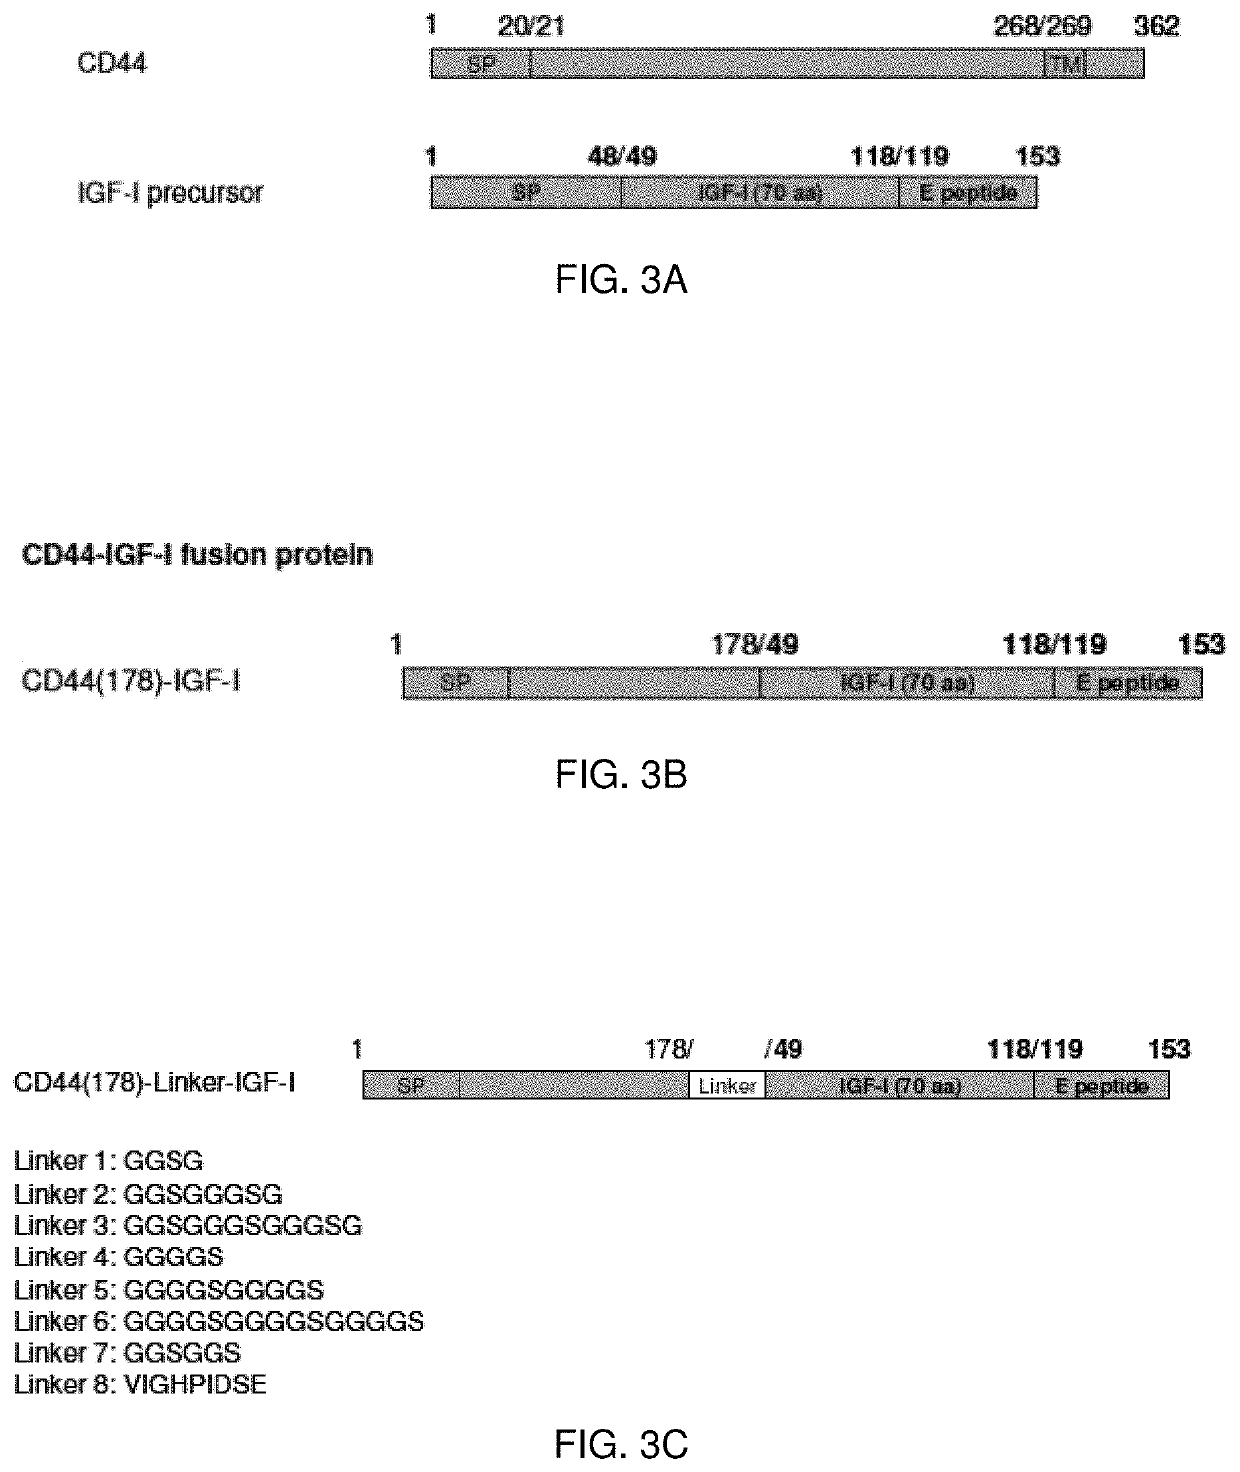 Hyaluronic Acid Binding Domain-Growth Factor Fusion Protein cDNAs and Fusion Proteins for Cartilage Matrix Preservation and Report